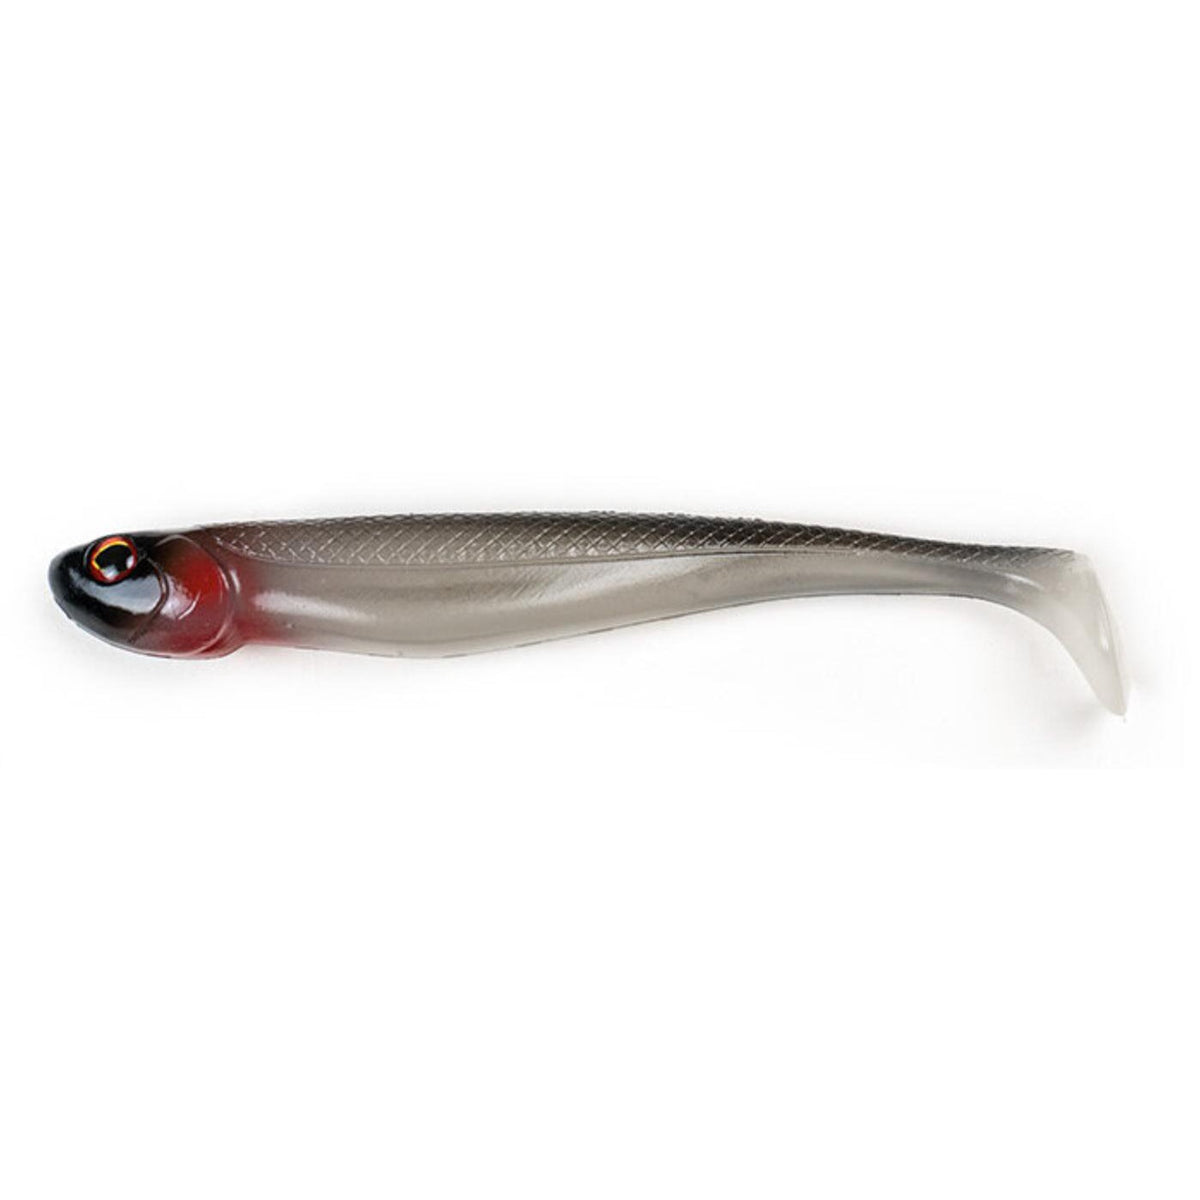 Crow Peak Fishing PB Slider 7 Glide Bait, Jointed Swimbait Lure for  Fishing Big Bass, Pike, and Musky (Rainbow Trout), Baits & Scents -   Canada